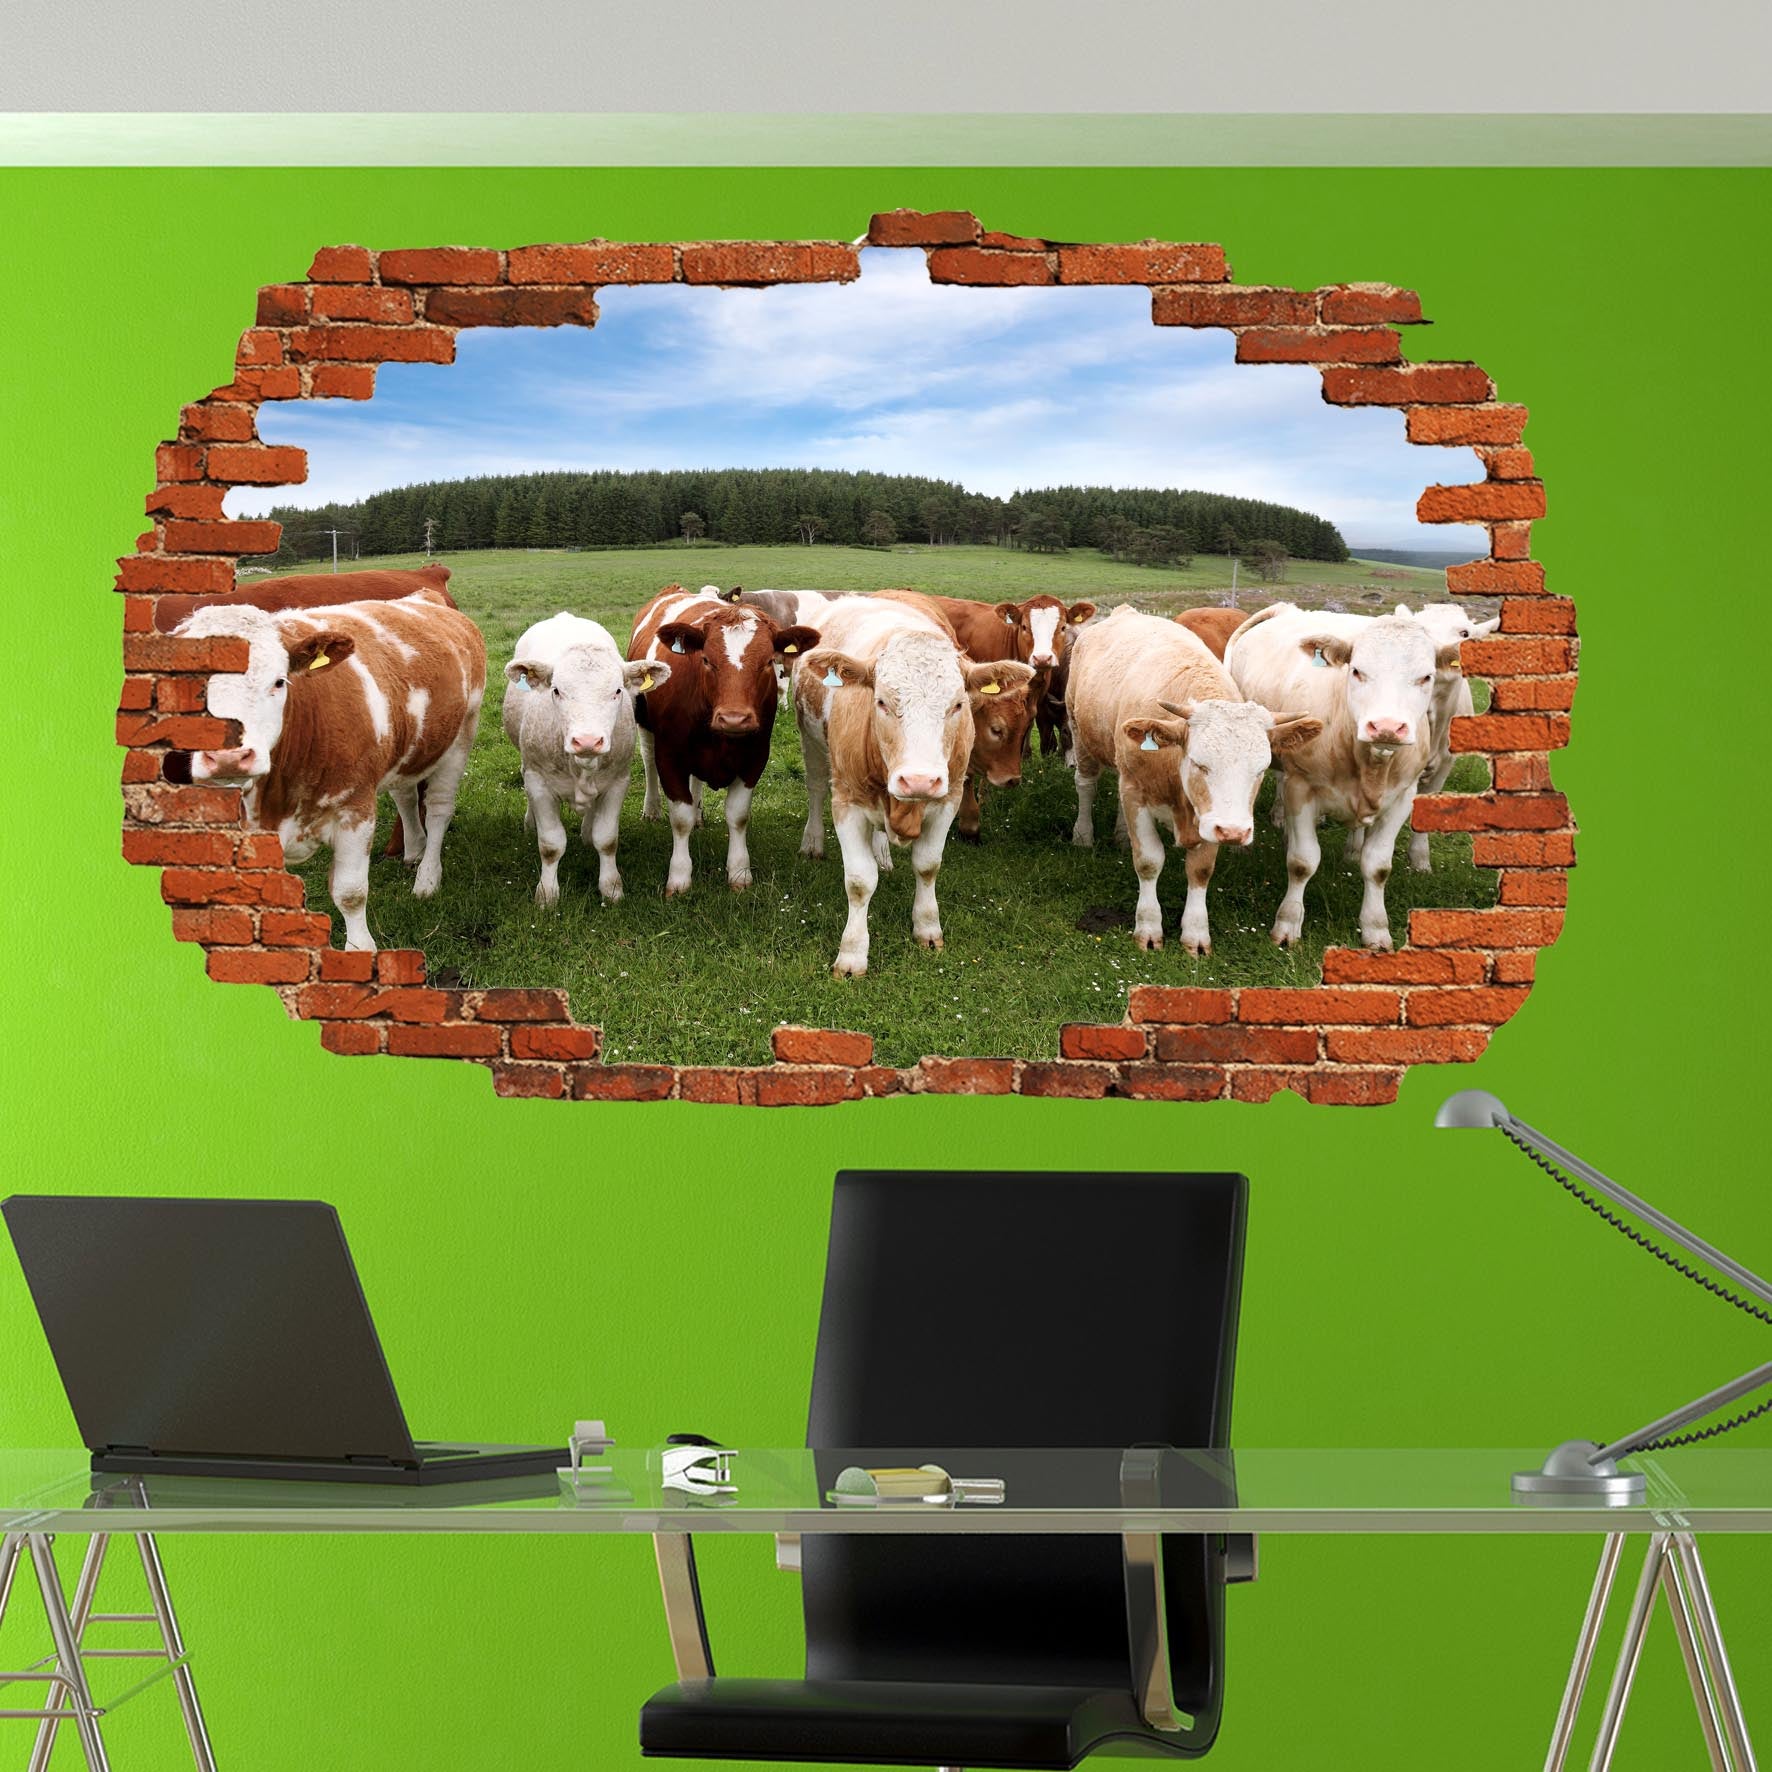 Cow and Cattle Wall Sticker Mural Decal Poster